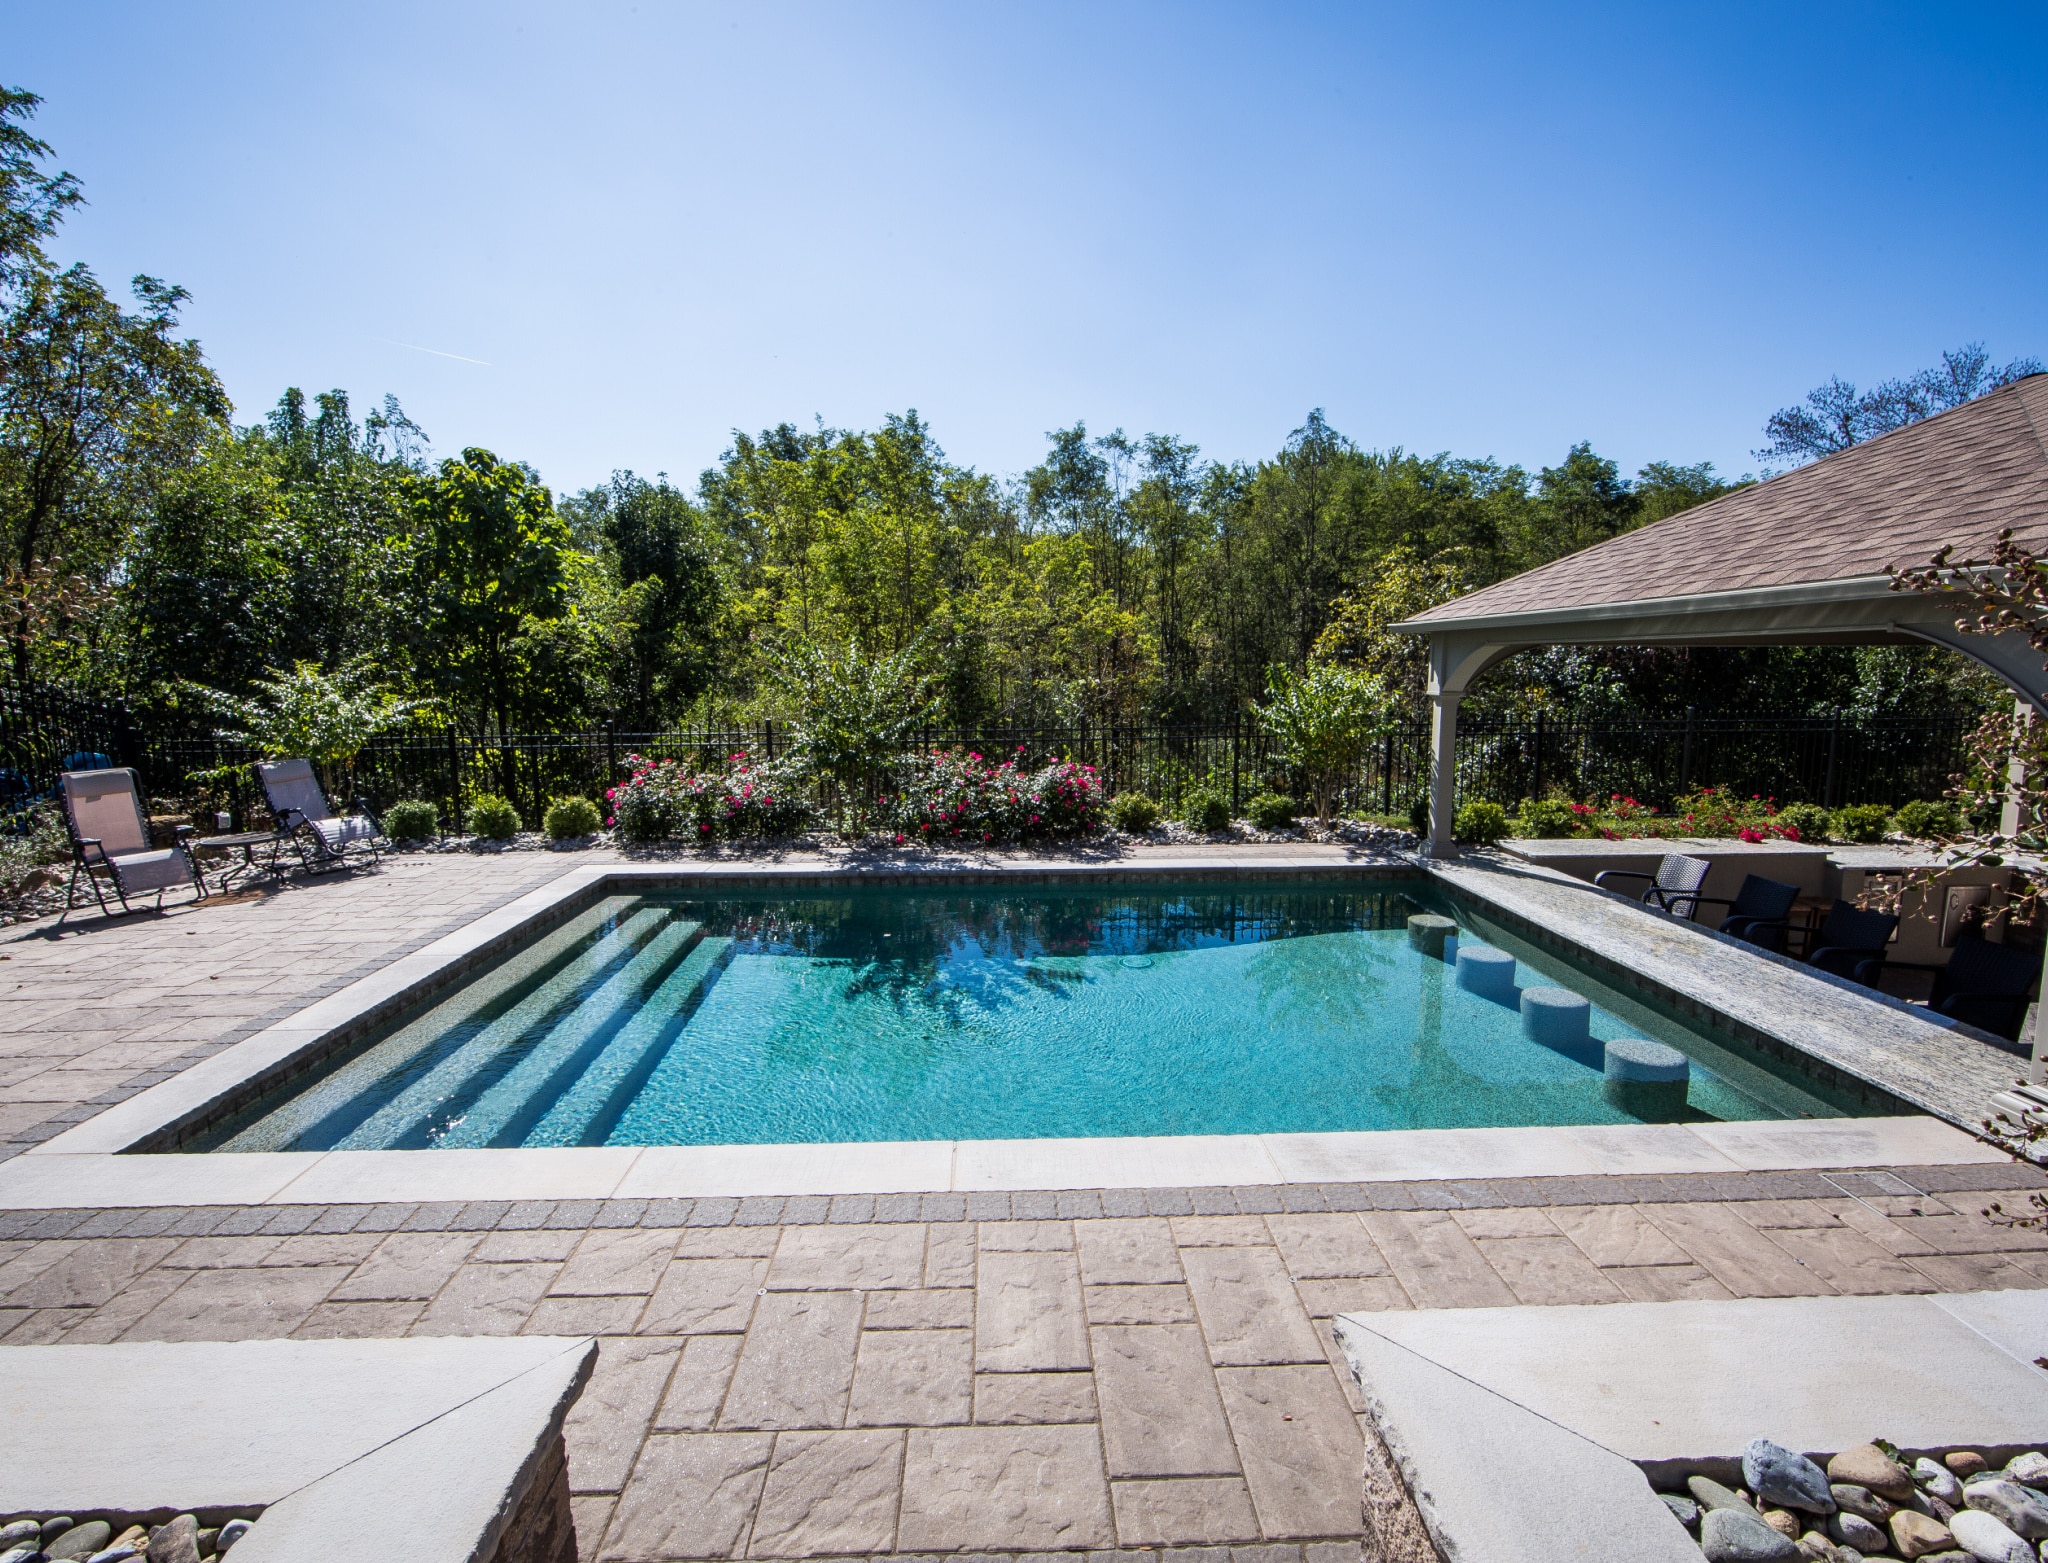 pool renovation isn’t as scary as you think